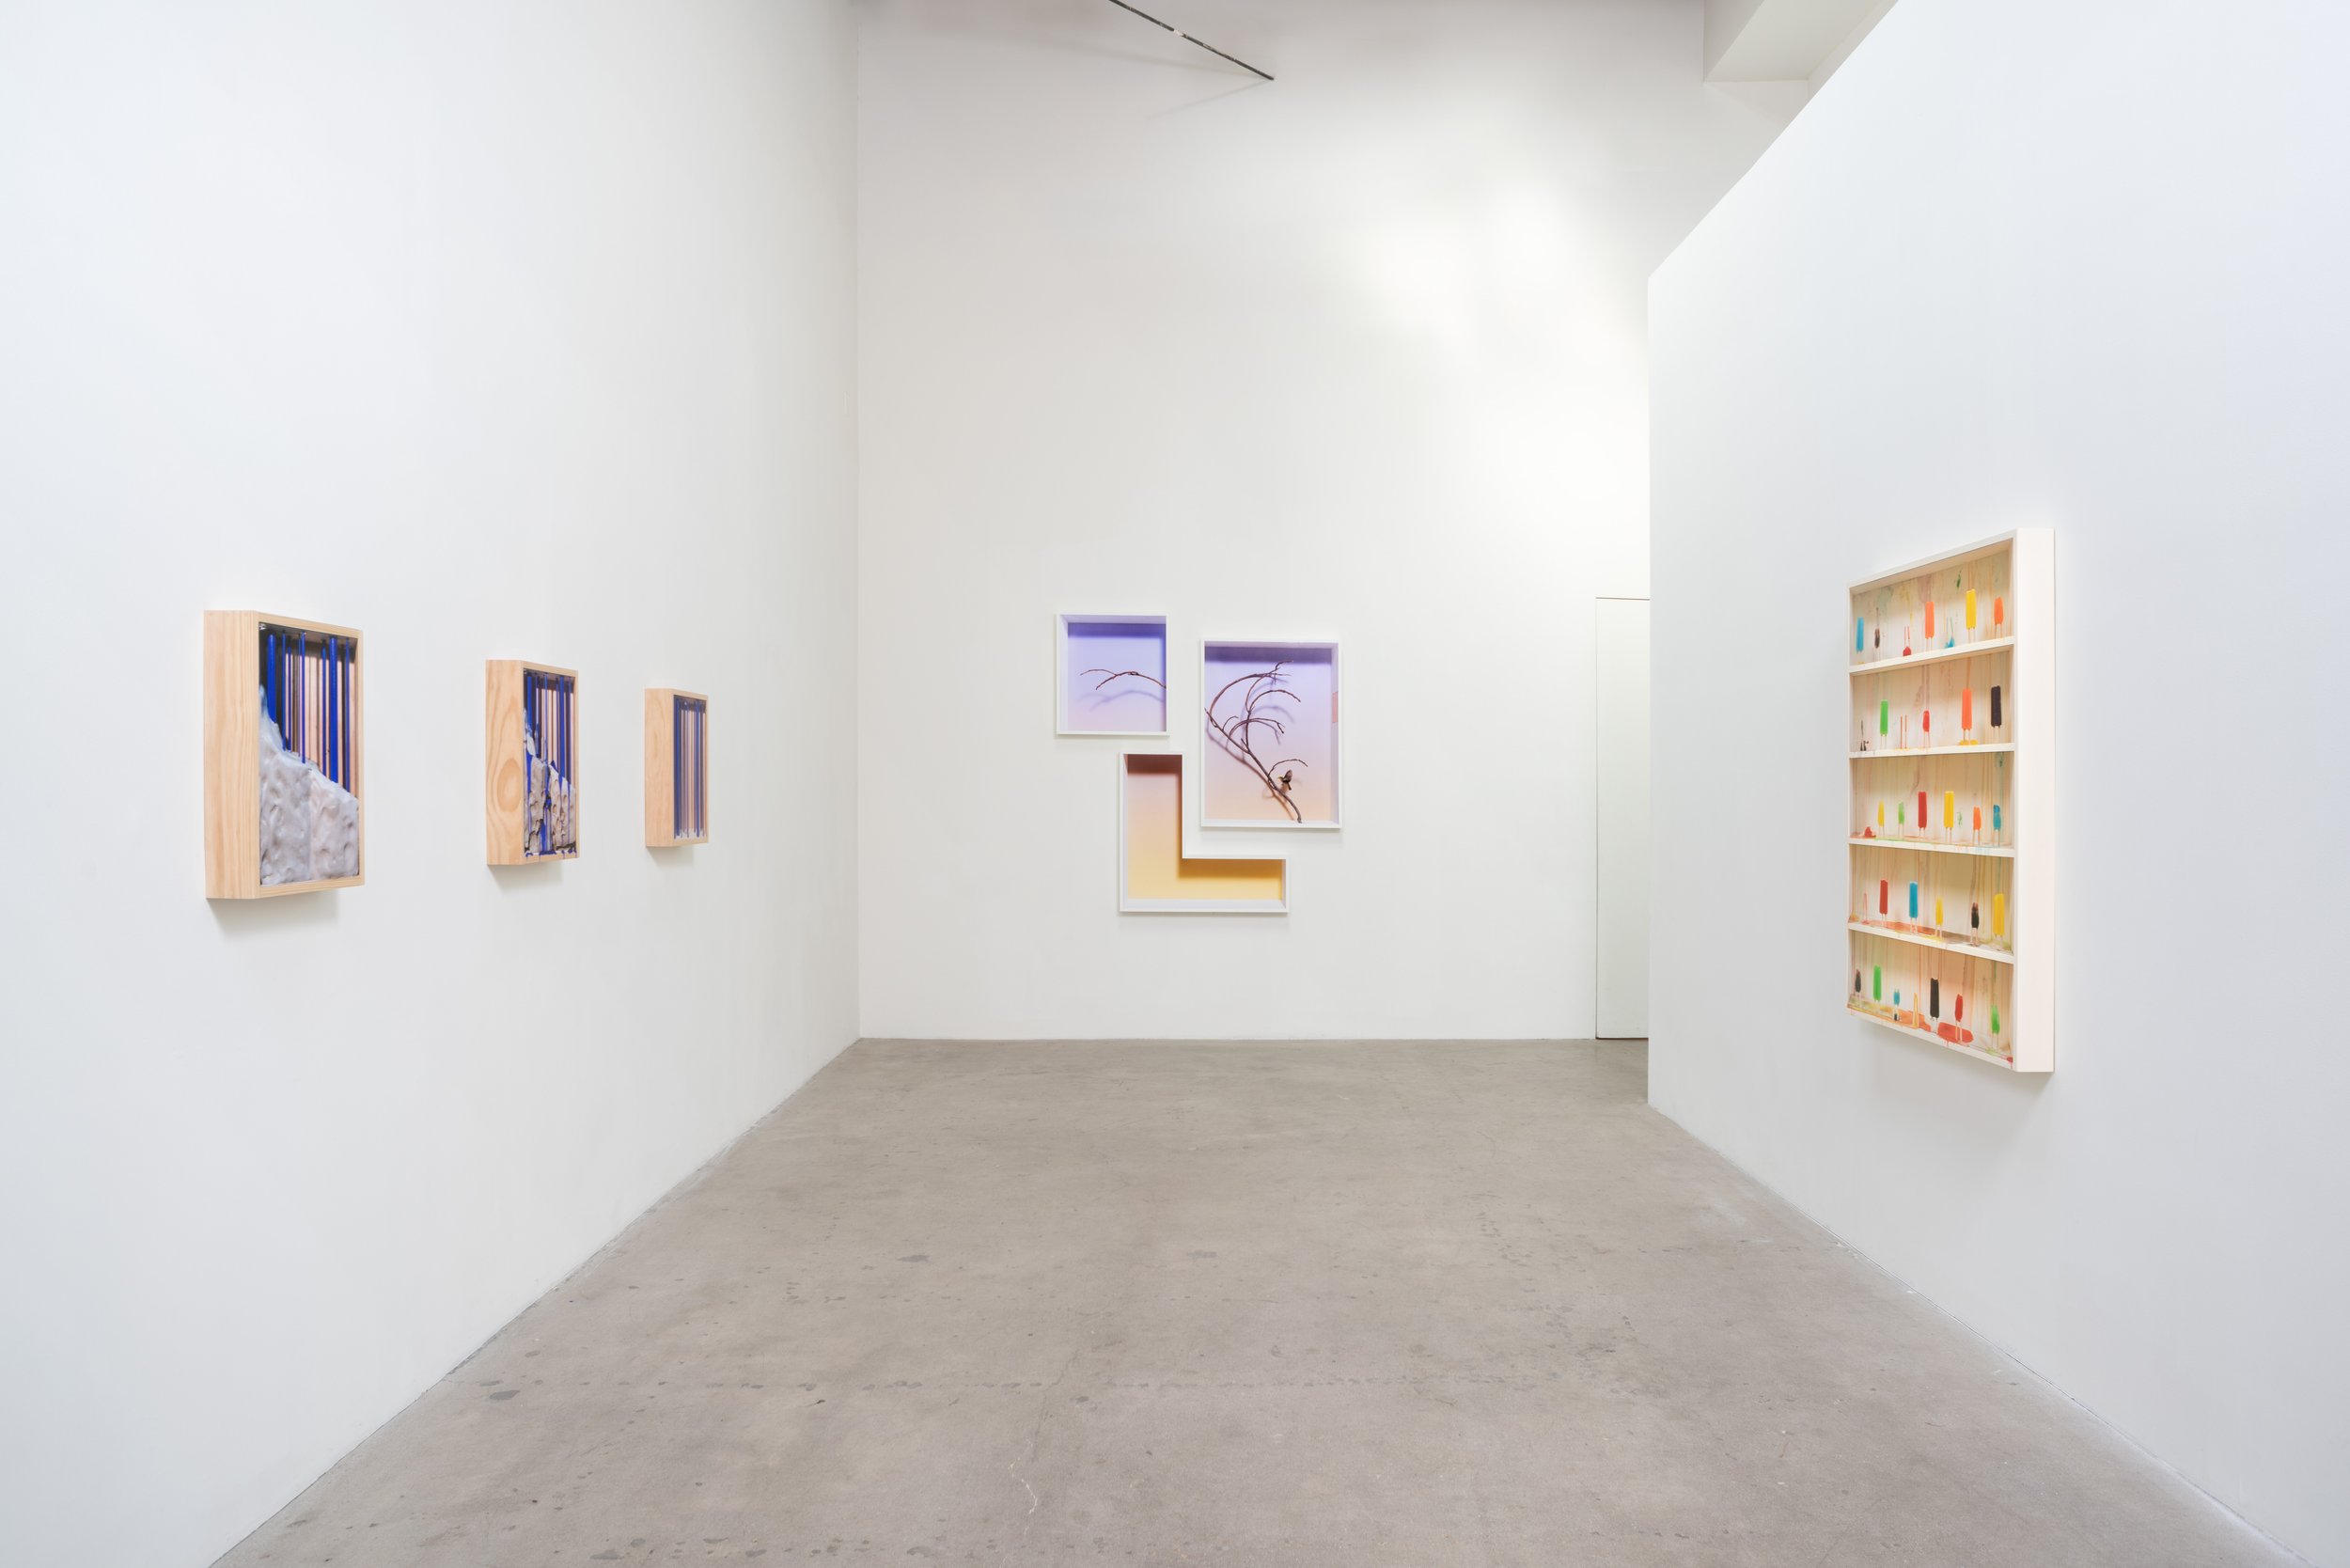  Installation View: Time’s a Taker, March 26 - May 7, 2022, Moskowitz Bayse, Los Angeles. 